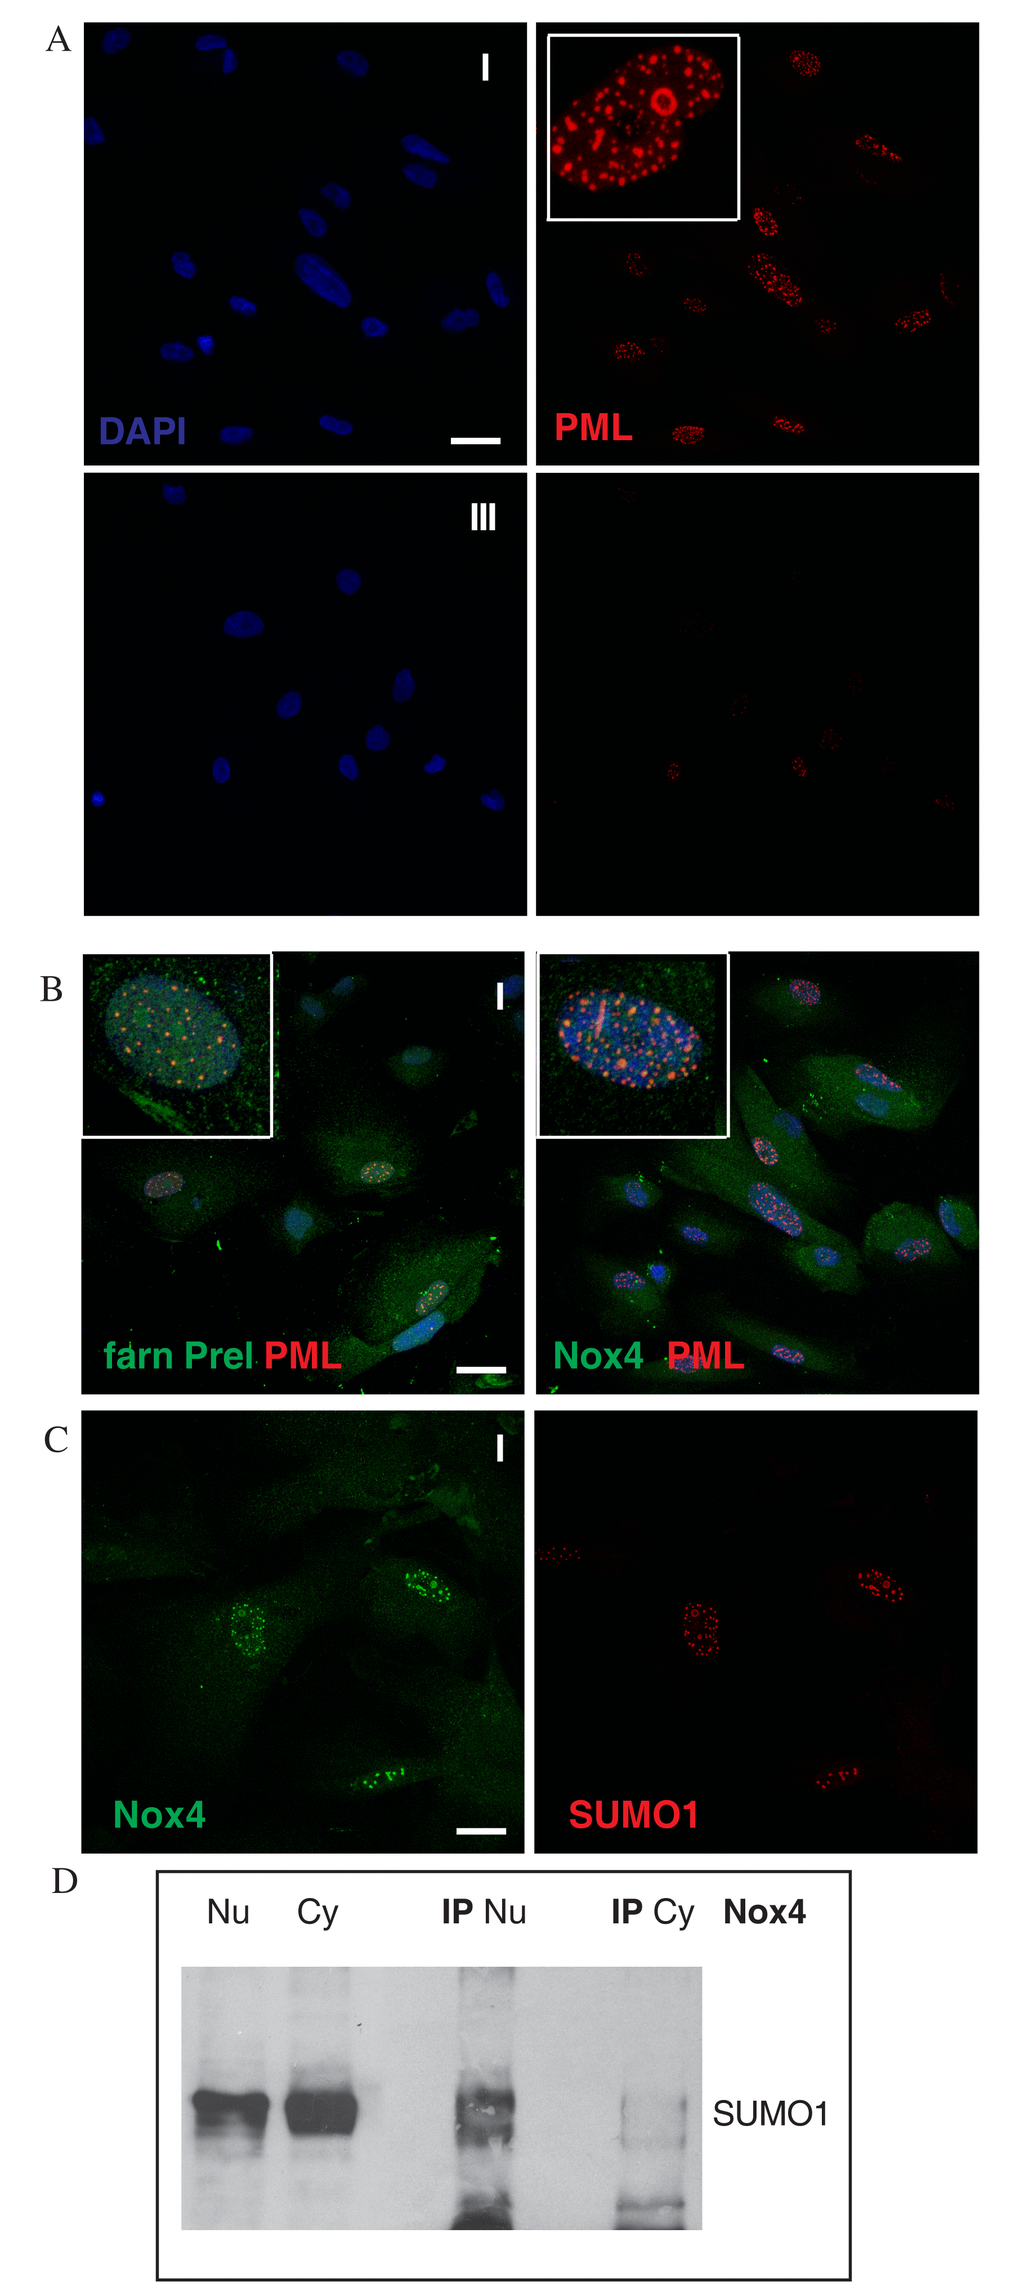 Nox4 post-translational modification in nuclei of AFSC. (A) Representative images showing DAPI (blue) and PML (red) of AFSC of group I and III. Tripled magnification image is present in white square of group I. (B) Representative images of AFSC group I (faster senescent cells) showing superimposing of DAPI (blue), farnesylated prelamin A (green) or Nox-4 (green) and PML (red). Tripled magnification image is present in white square of both. Scale bar= 10 µm. (C) Representative confocal image of AFSC group I samples labelled with Nox4 (green) and SUMO1 (red). Scale bar= 10 µM. (D) Western blot analysis of nuclear lysate (Nu), cytoplasmic lysate (Cy) and immunoprecipitation experiment of Nu and Cy with Nox4 antibody then revealed with anti-SUMO1. Data are representative of three independent experiments.